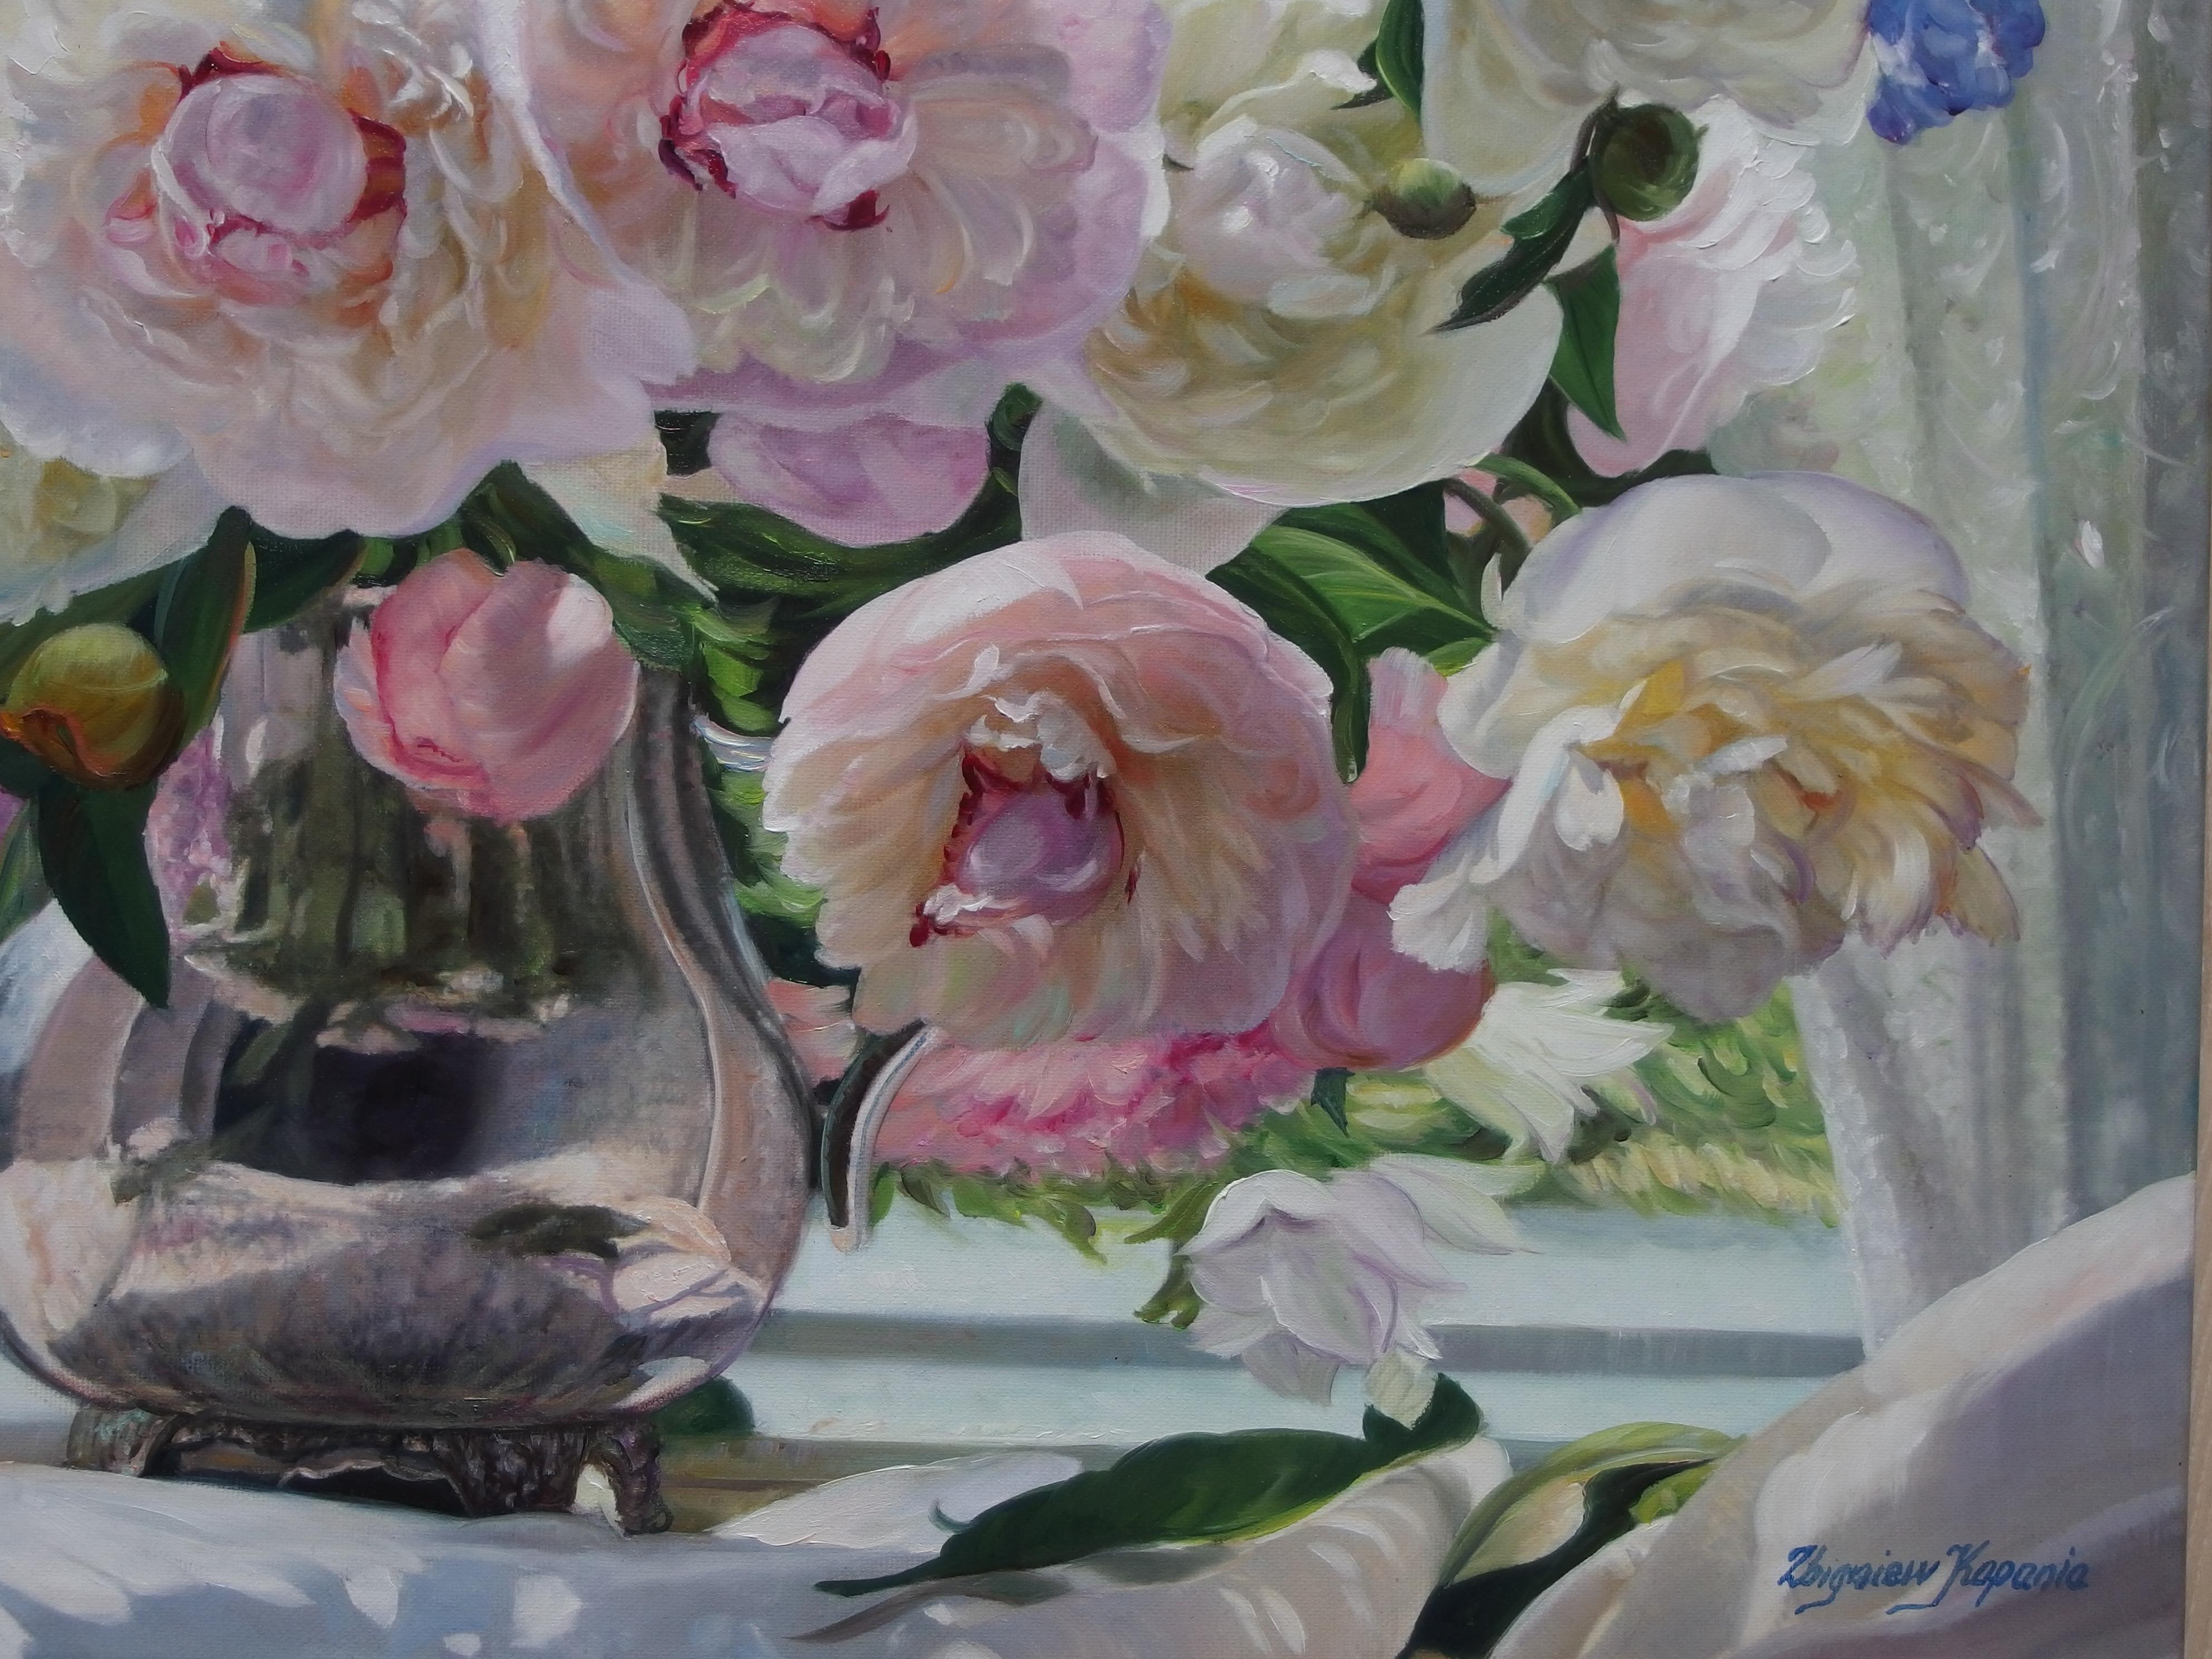 White And Pink Peonies in The Window - Painting by Zbigniew Kopania